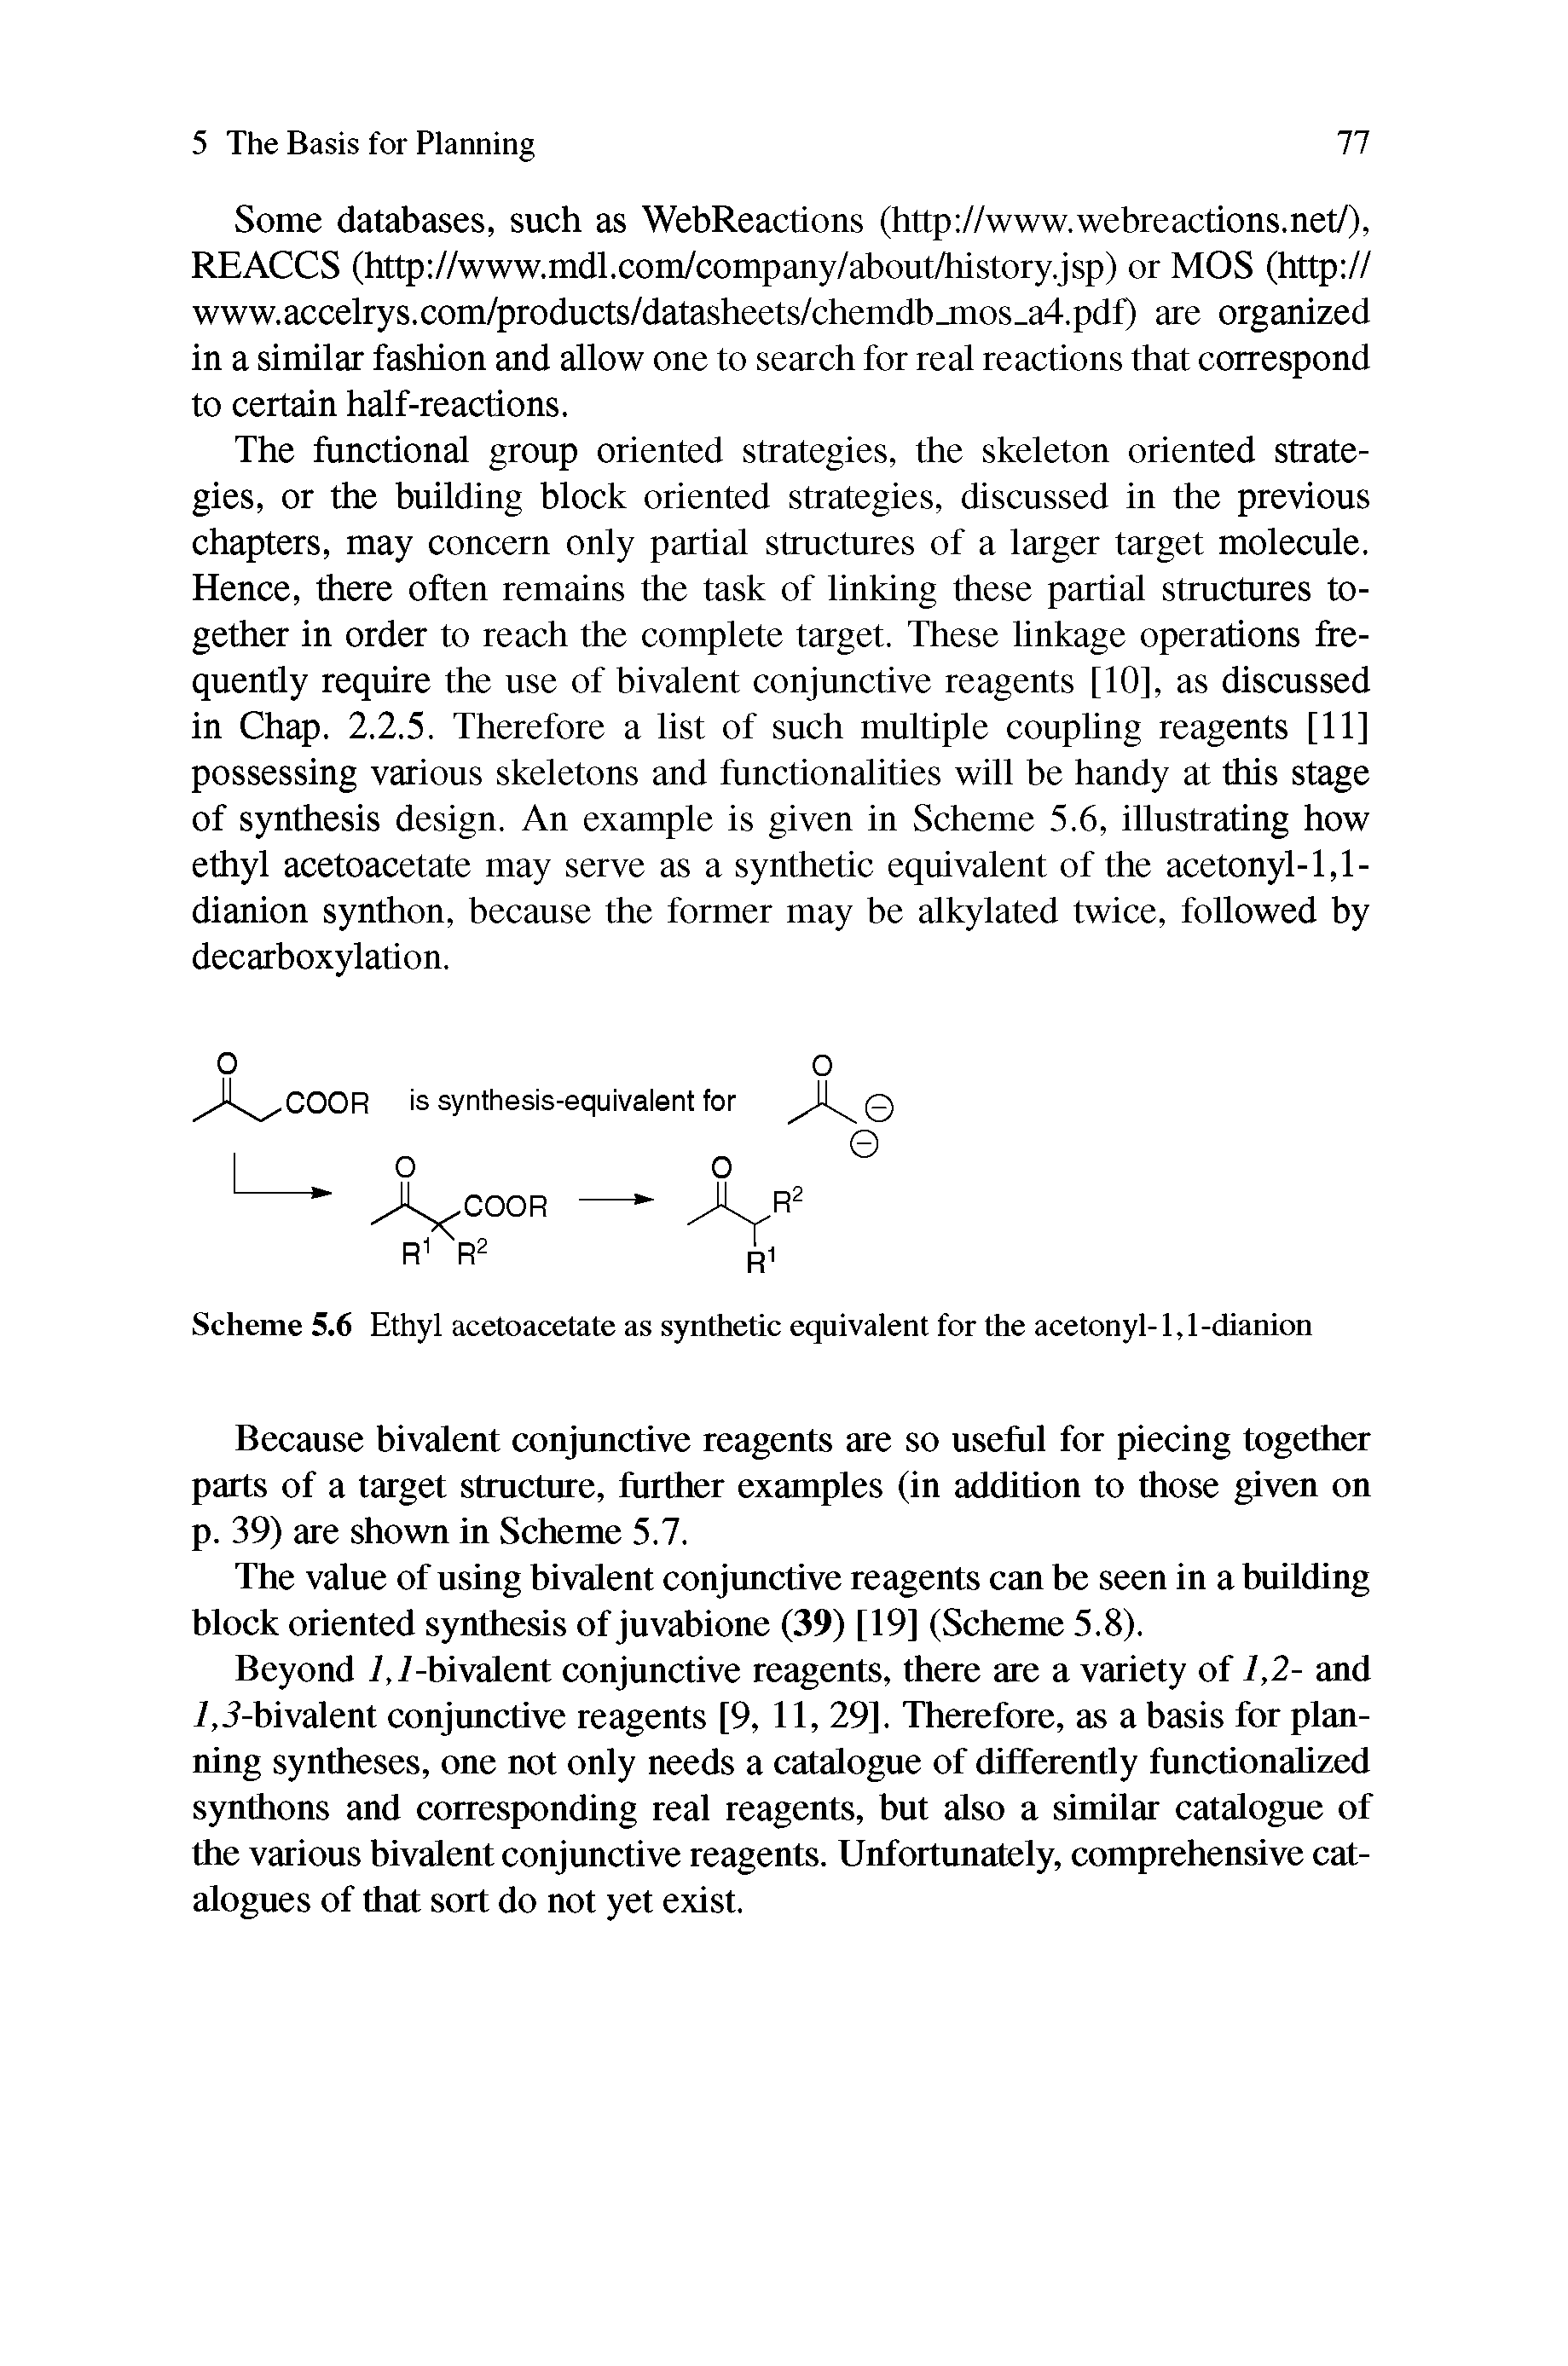 Scheme 5.6 Ethyl acetoacetate as synthetic equivalent for the acetonyl-l,l-dianion...